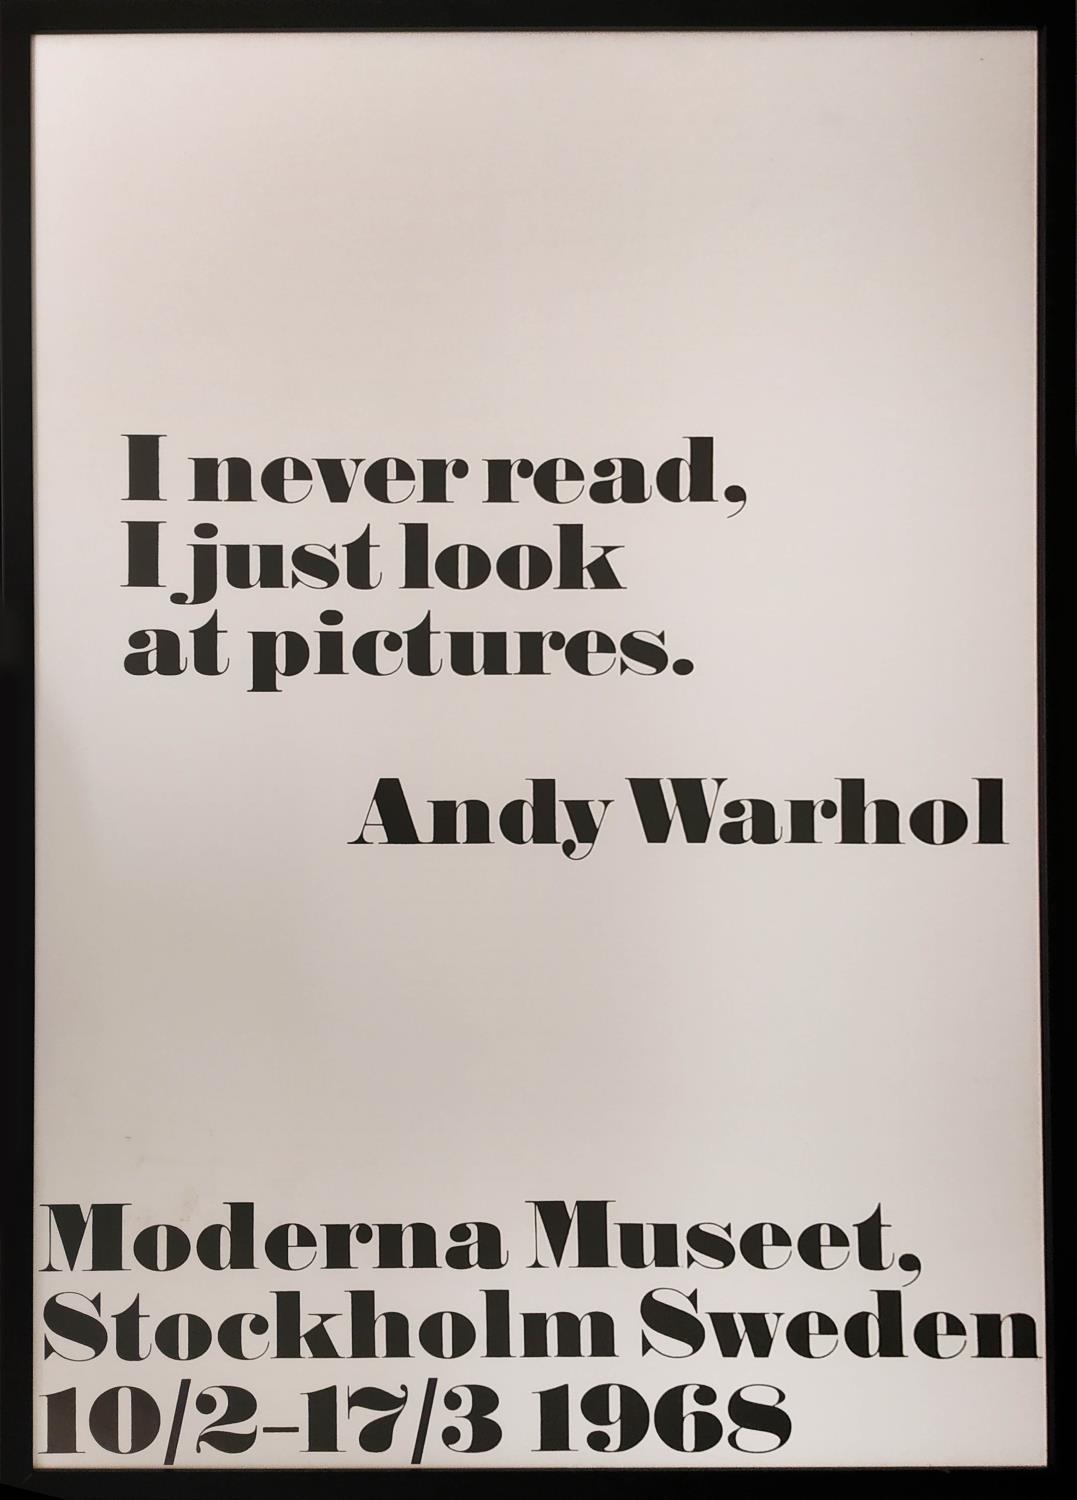 ANDY WARHOL 'I never read, I just look at pictures', lithographic poster for exhibition 'Moderna